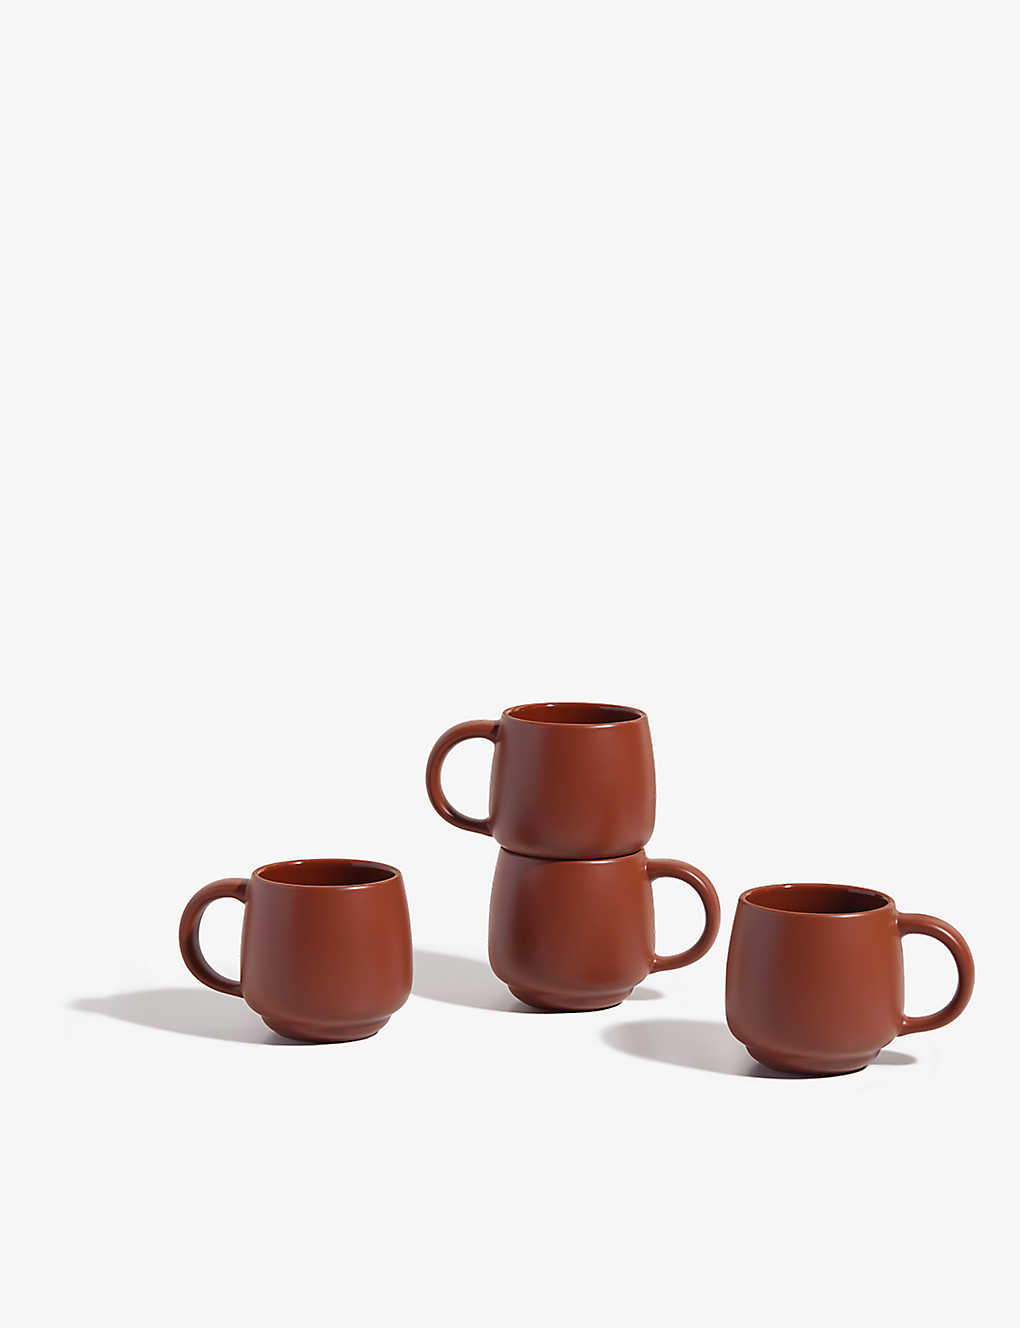 Our Place Terracotta Night + Day Ceramic Mugs Set Of Four